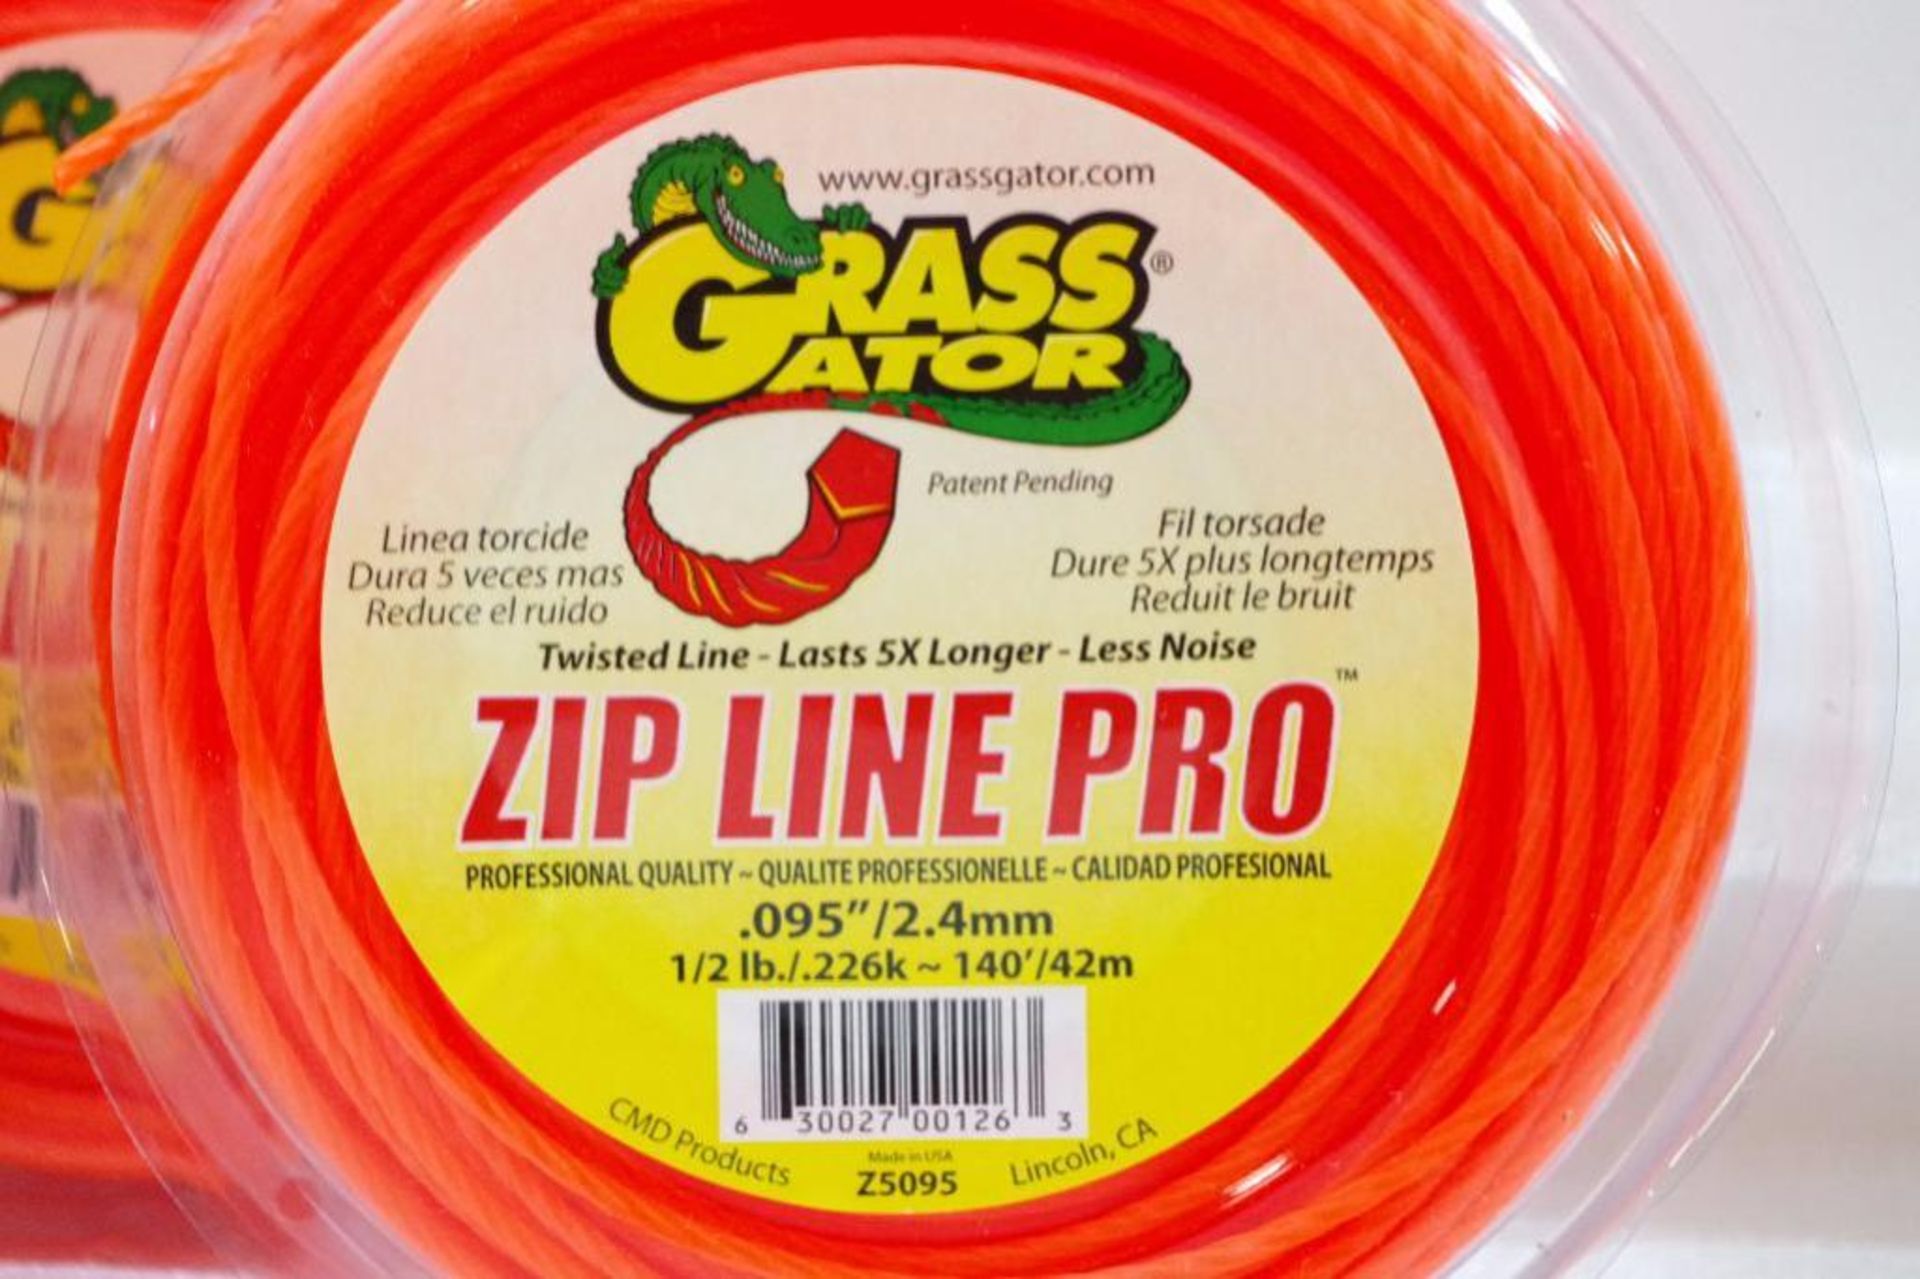 840' NEW GRASS GATOR .095 Zip Line Pro, M/N Z5095, (6 Coils of 140' Each) Made in USA - Image 2 of 4